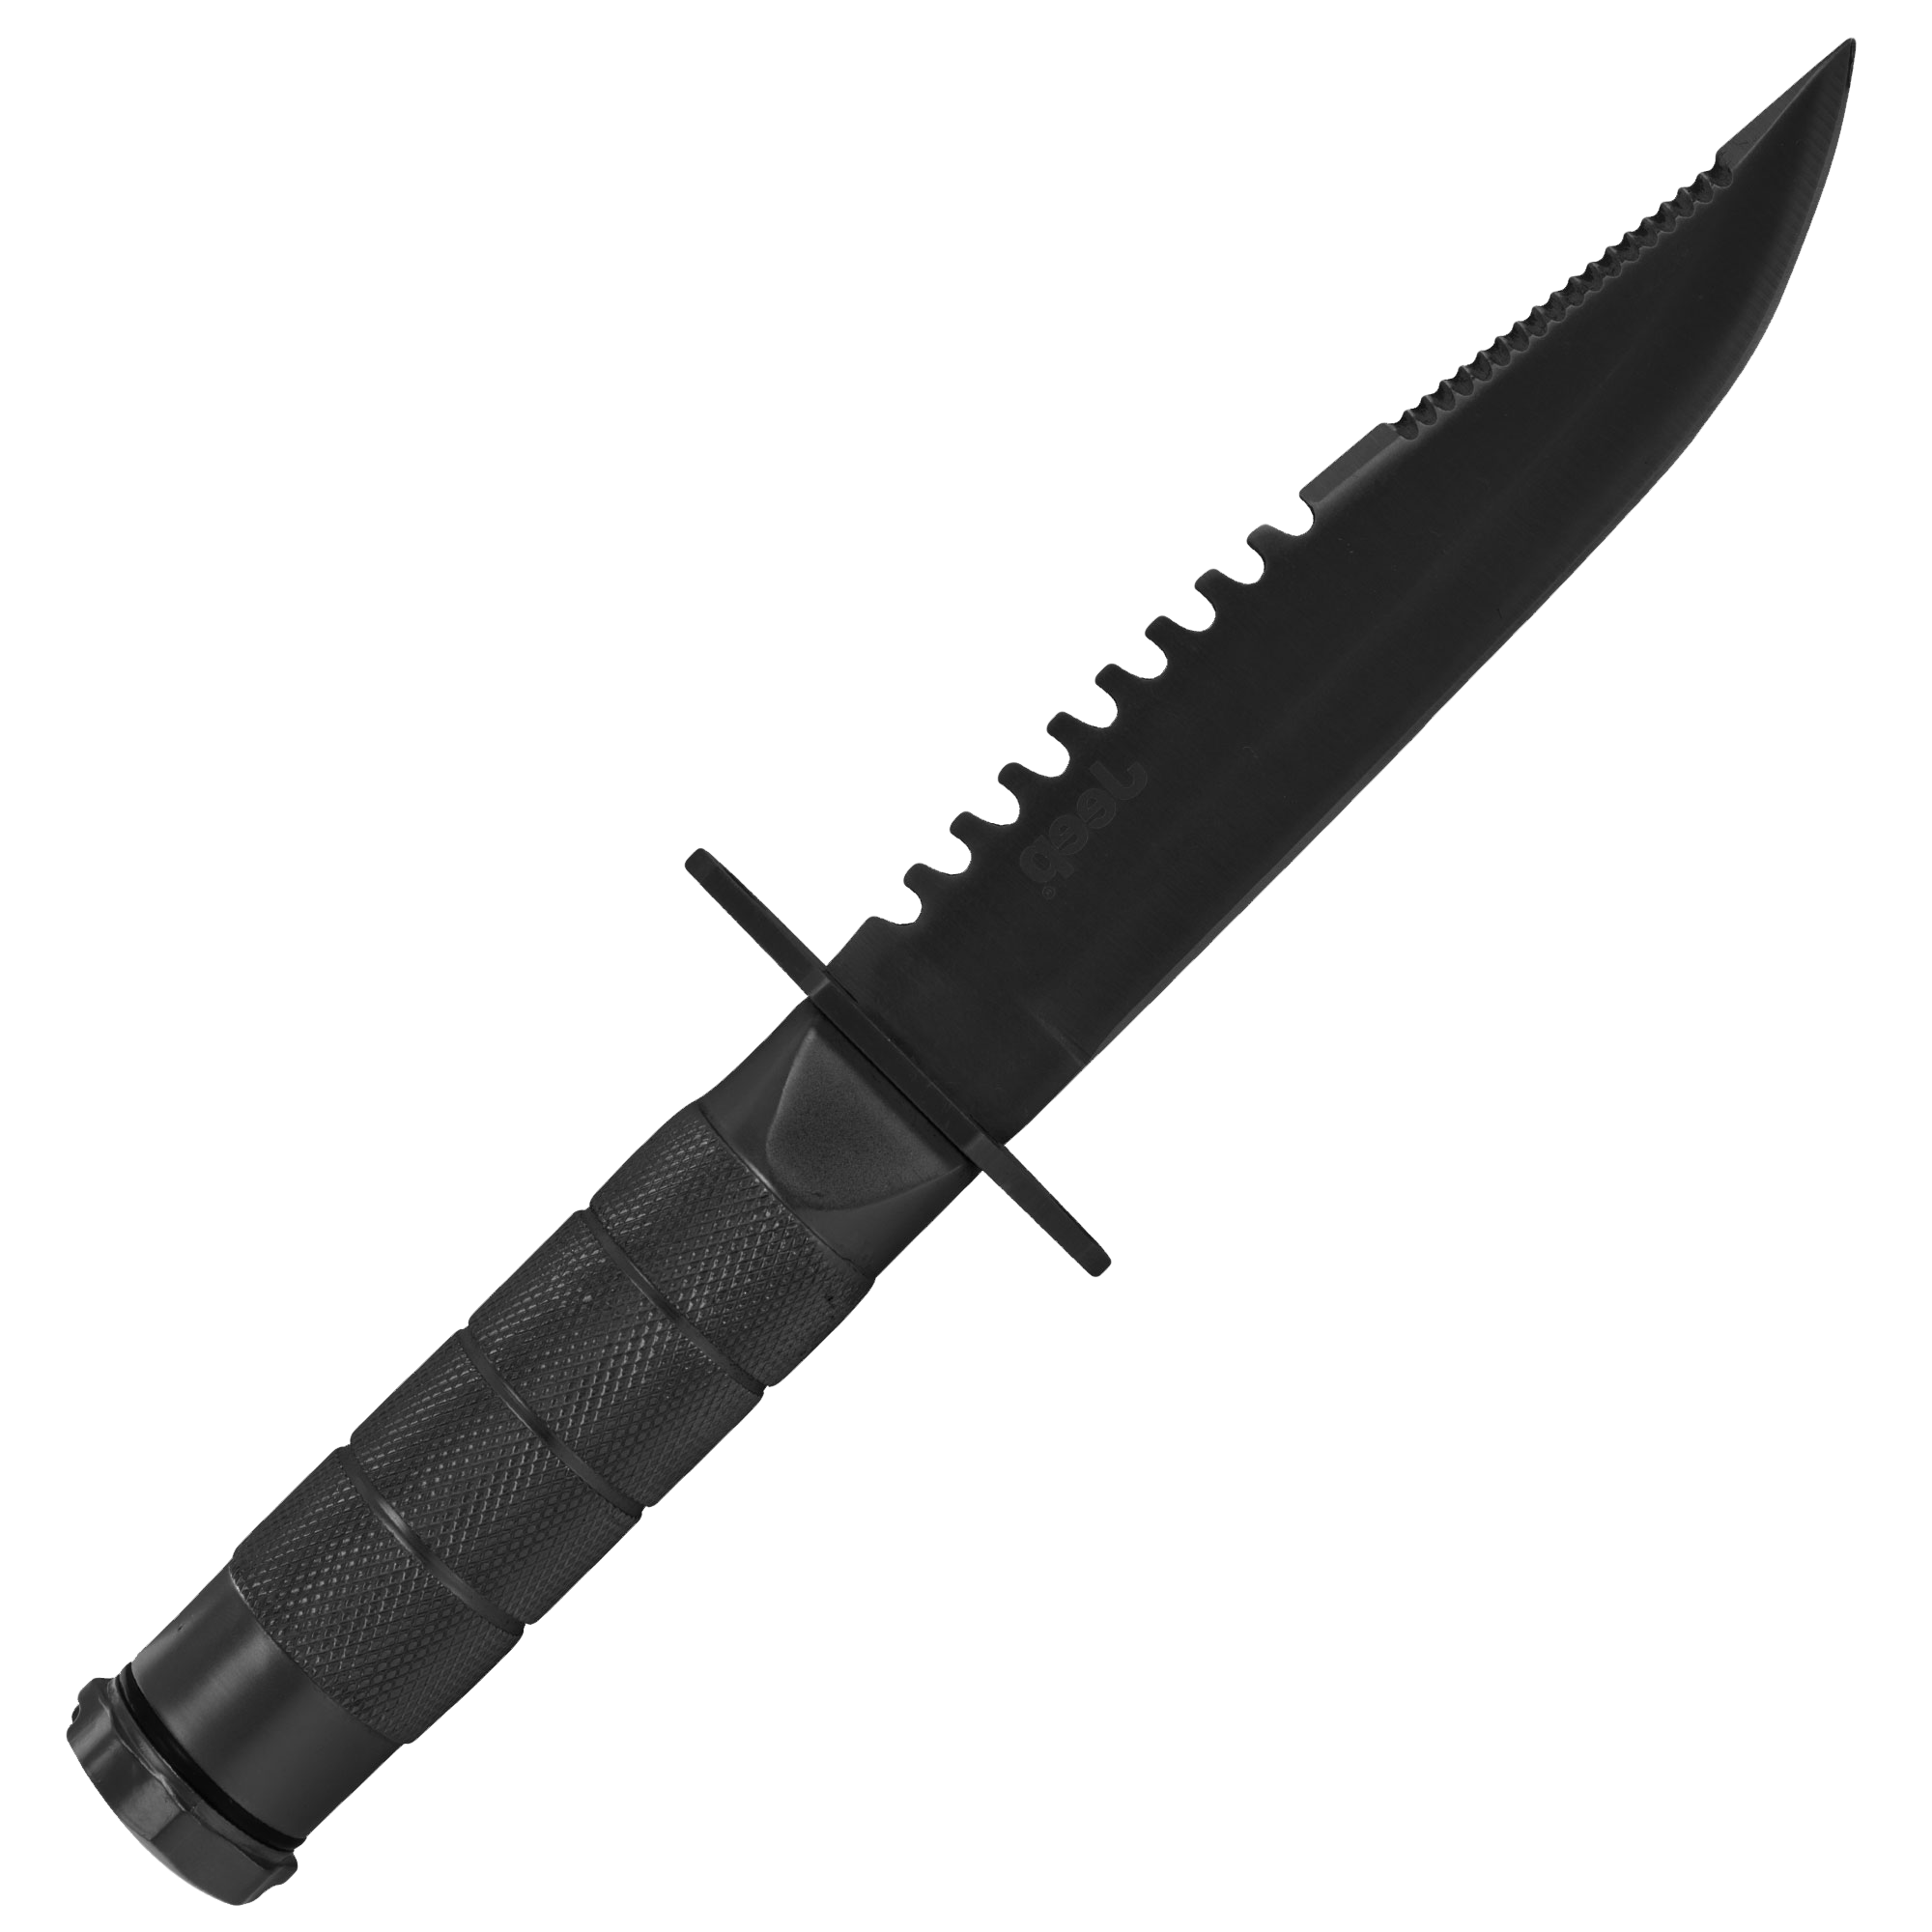 A Black Knife With A Black Handle